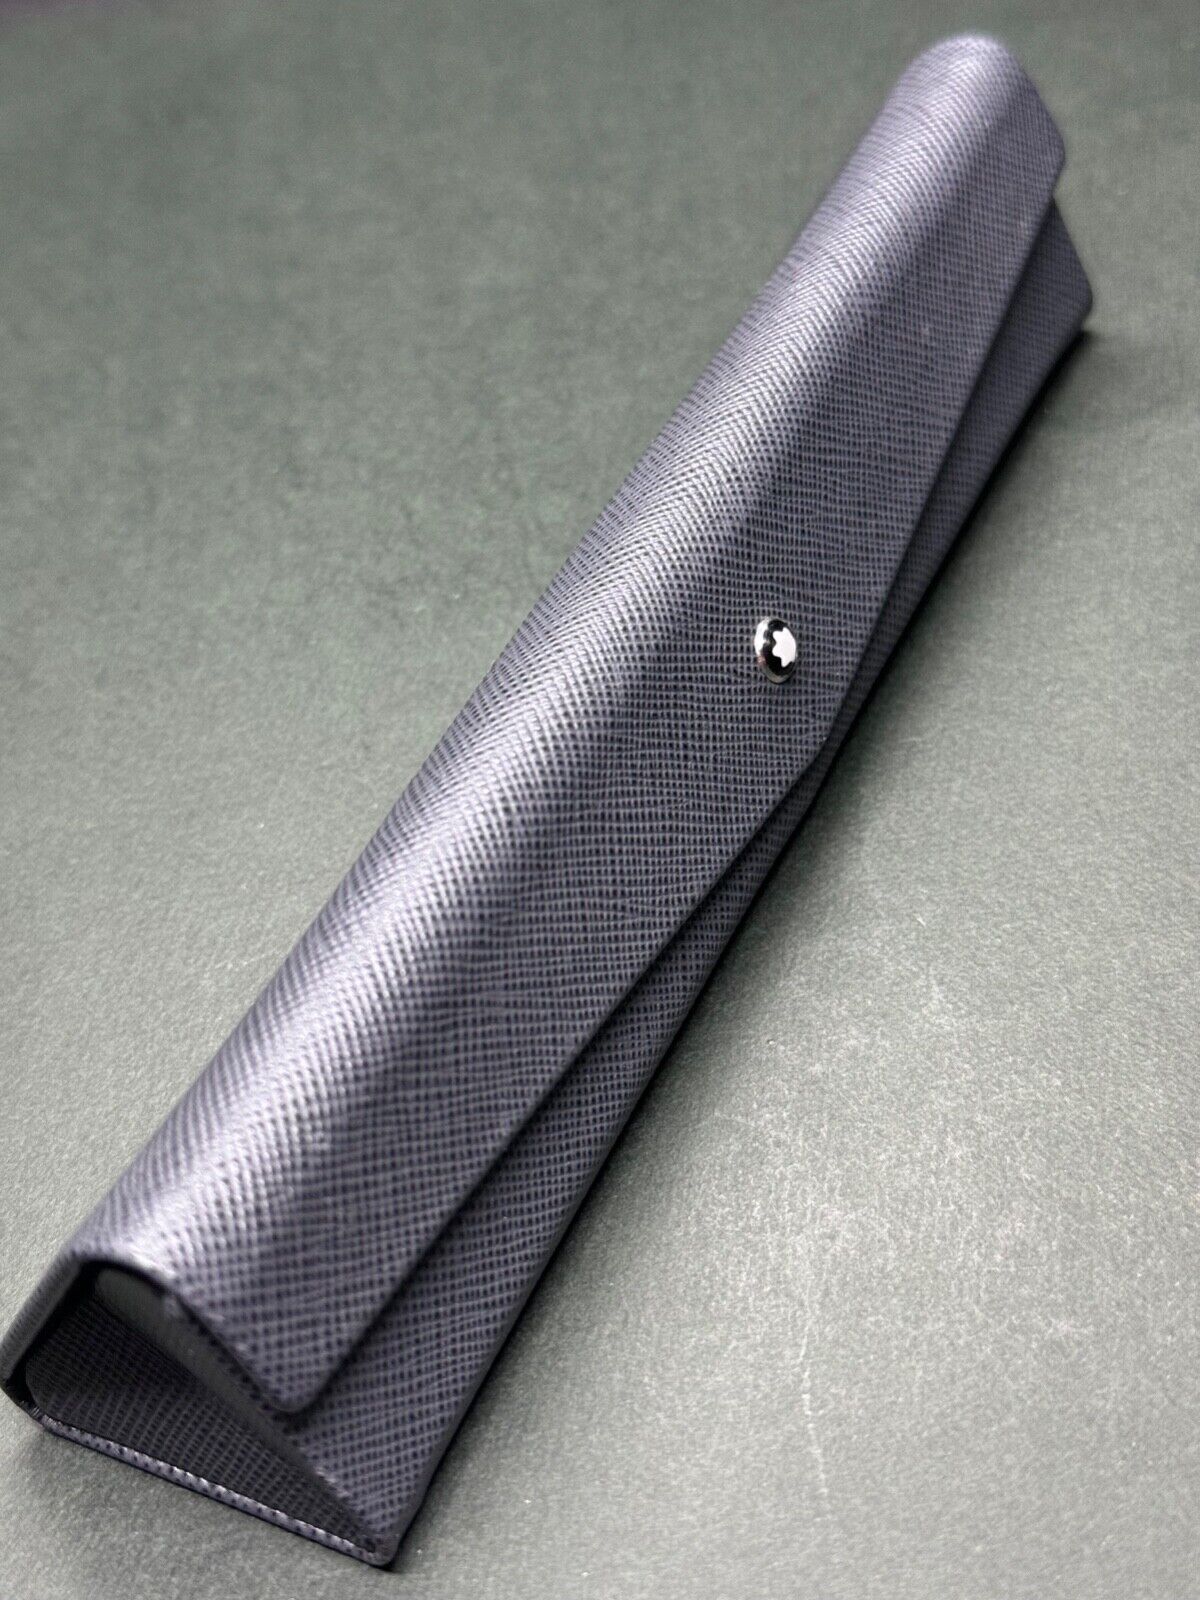 [Near MINT] MONTBLANC Sartorial Gray 116348 Pen Pouch Leather